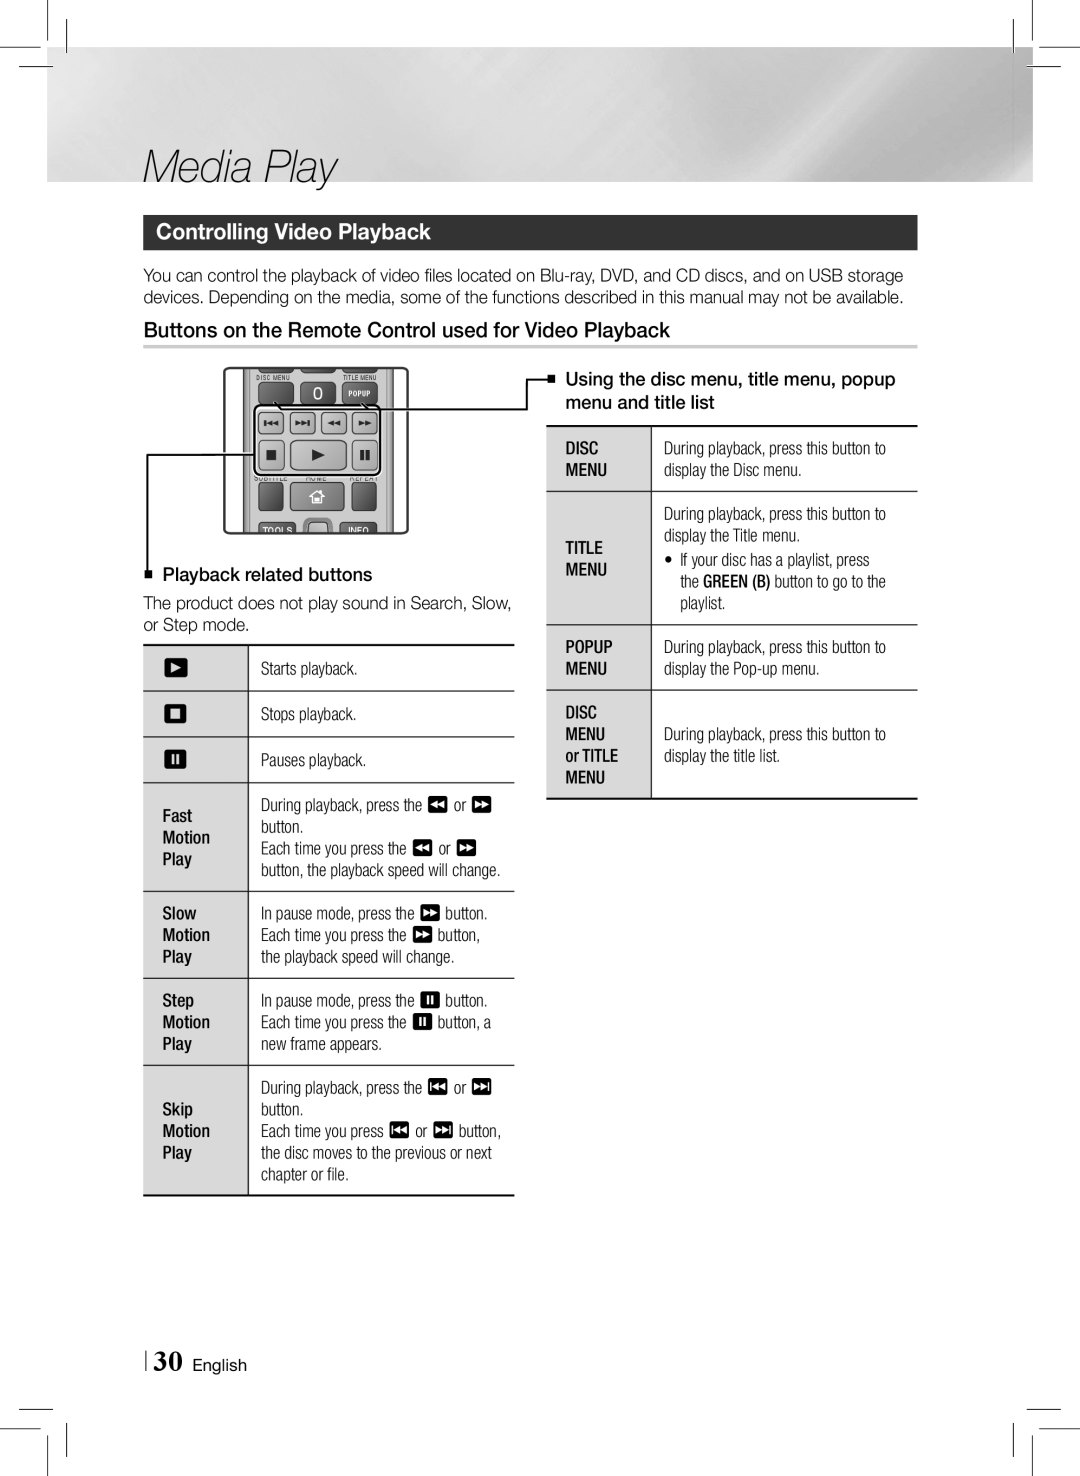 Samsung HTE3500ZA user manual Controlling Video Playback, Media Play 